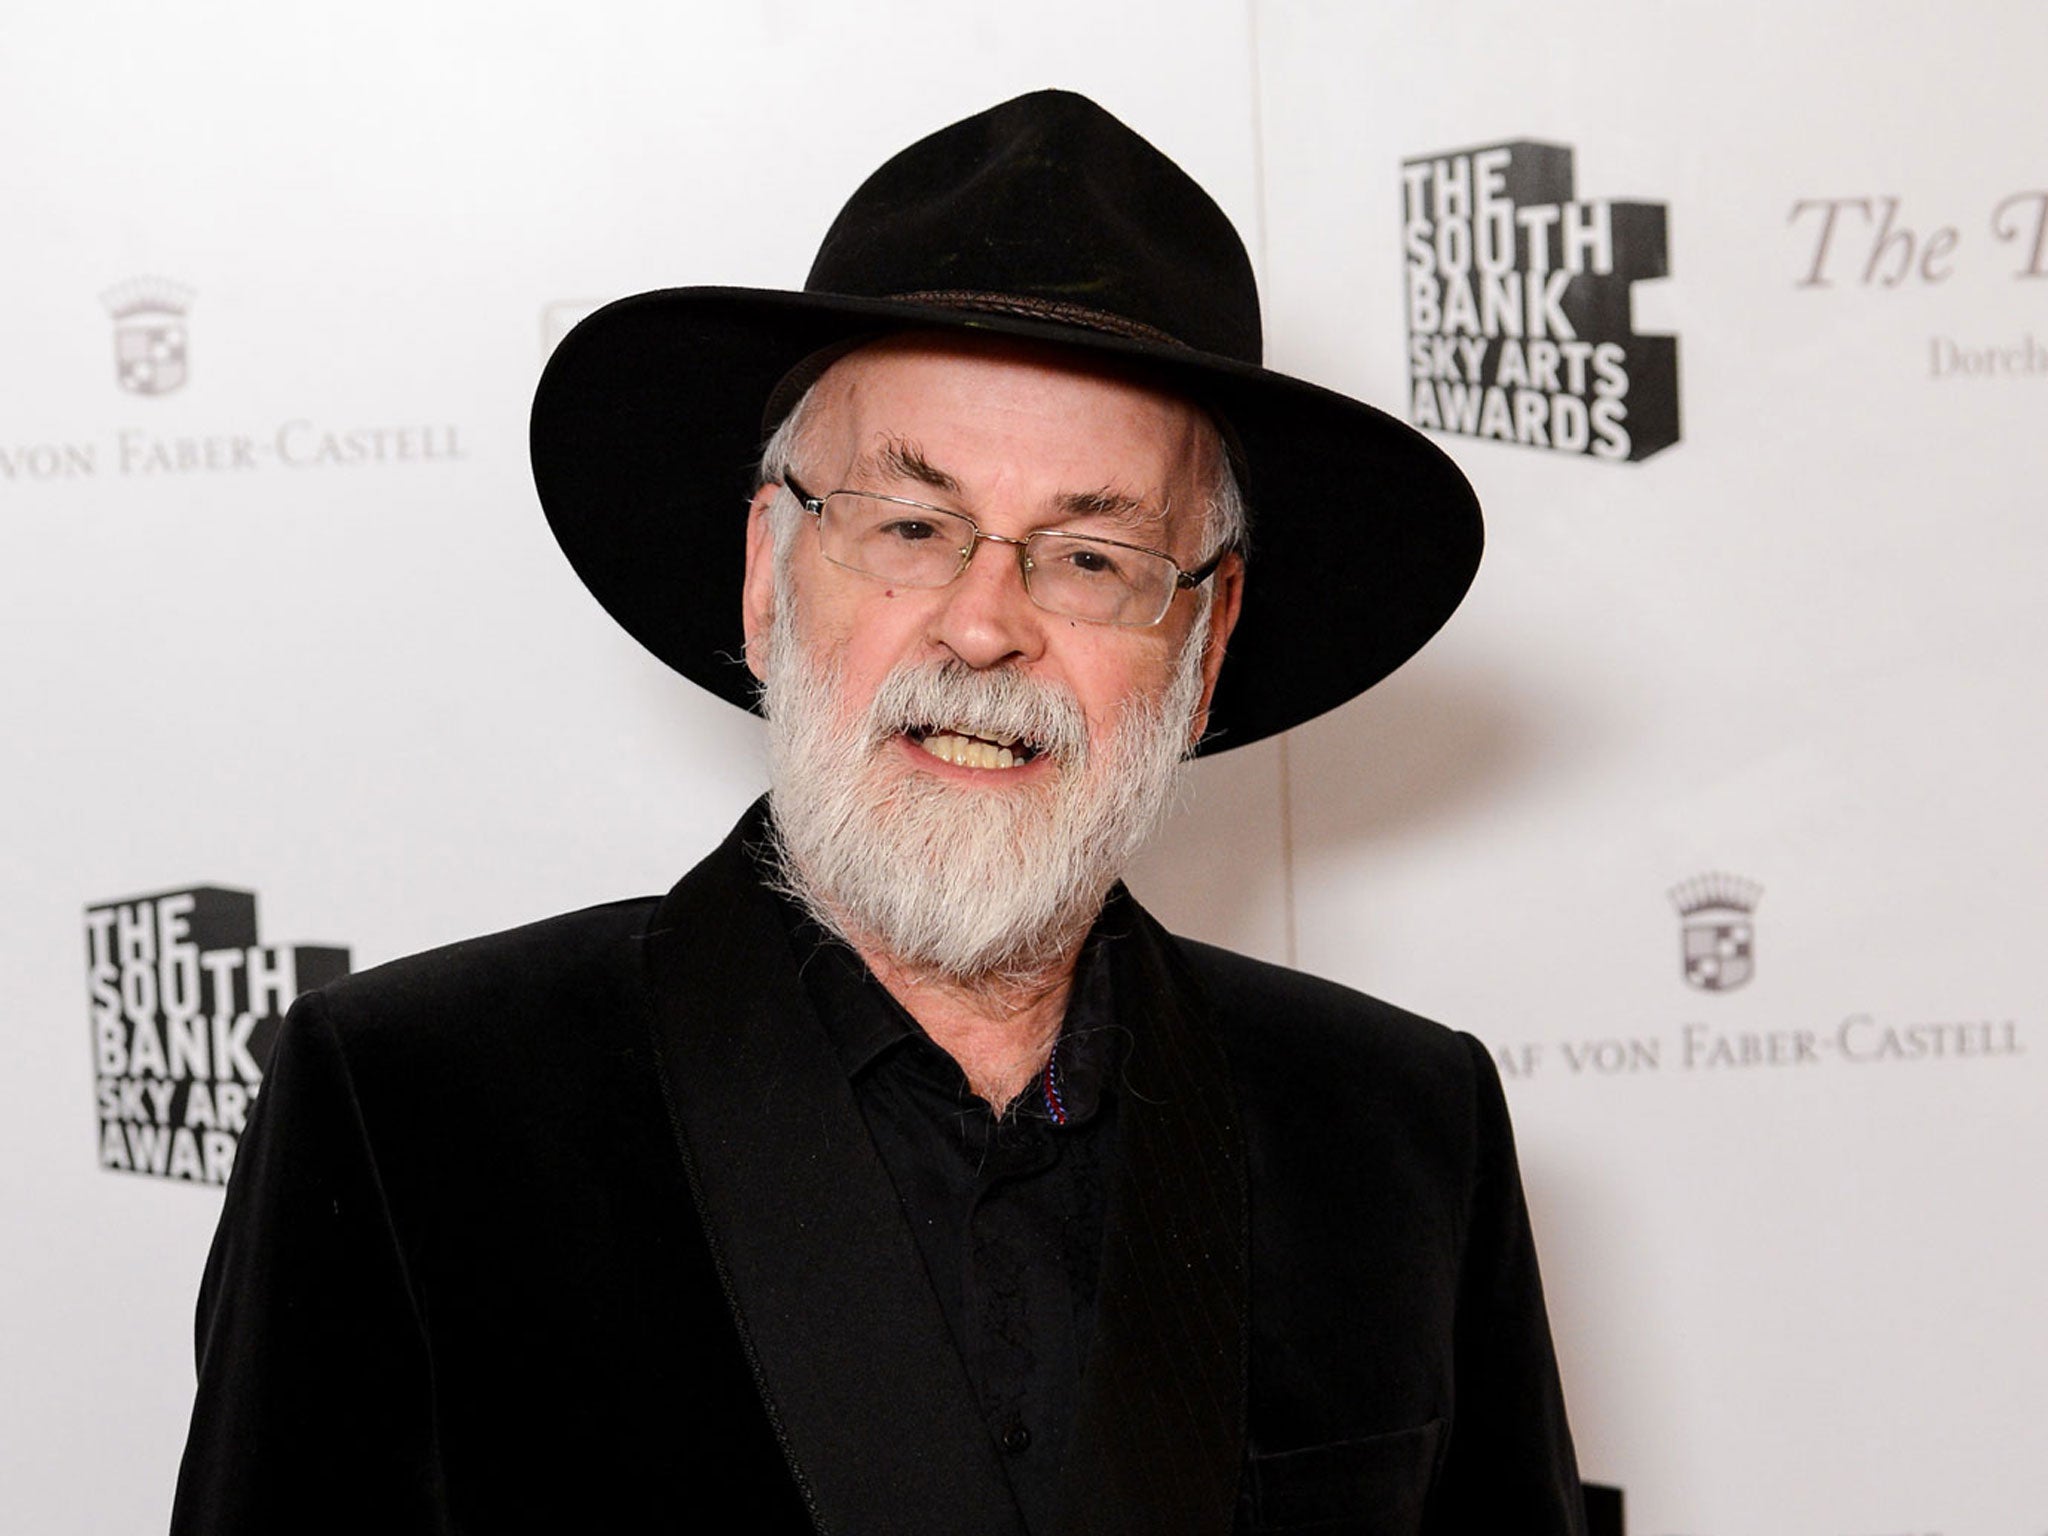 Comedy master: the late Terry Pratchett's humour is evident in this sci-fi collaboration